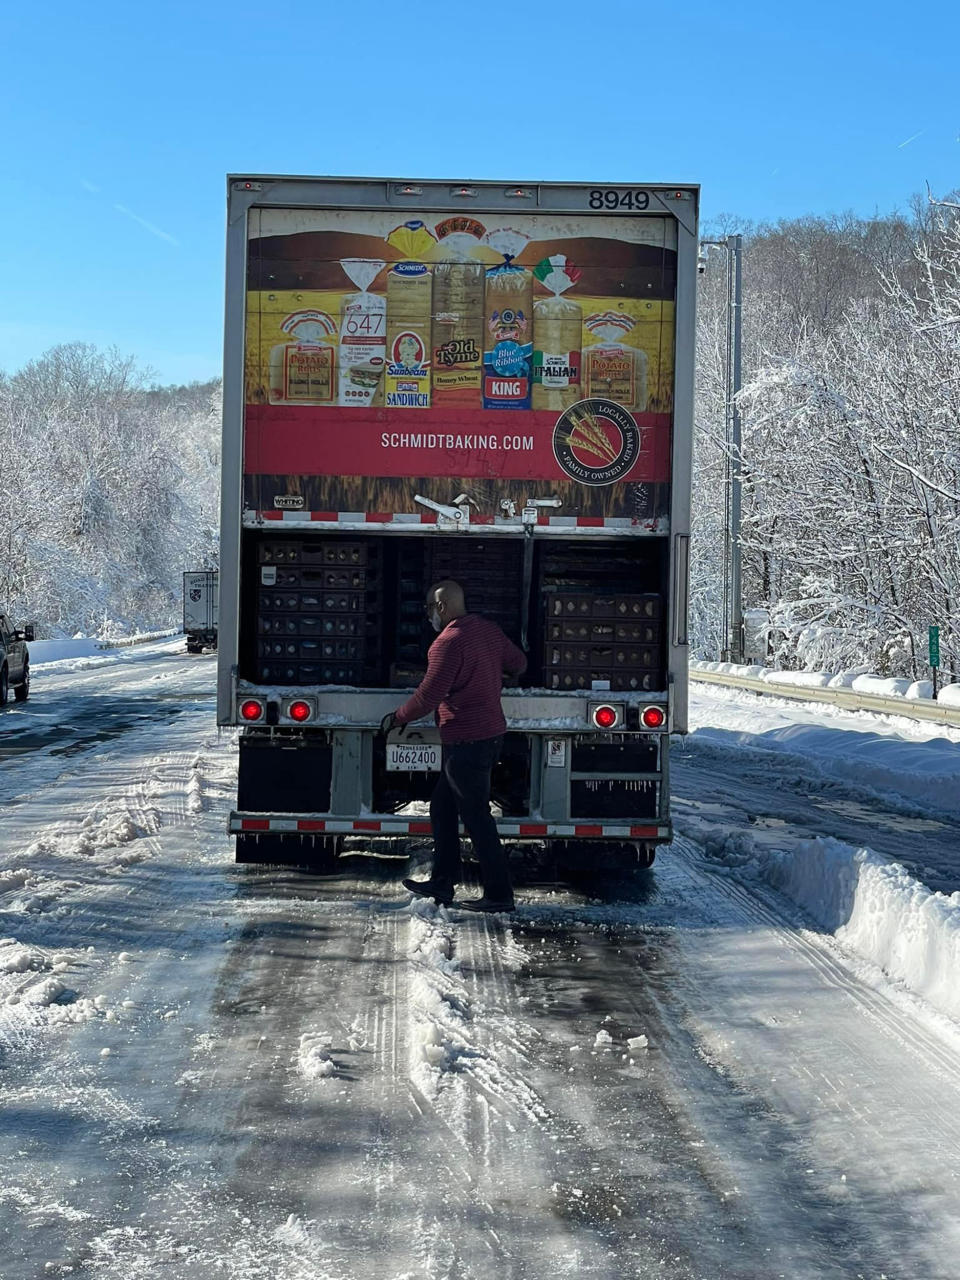 Ron Hill, a truck driver for Schmidt Baking Company, opened up the back of the truck to distribute loaves of bread and rolls to people stranded on icy I-95 in Virginia on Tuesday. (Casey Holihan Noe / Facebook)